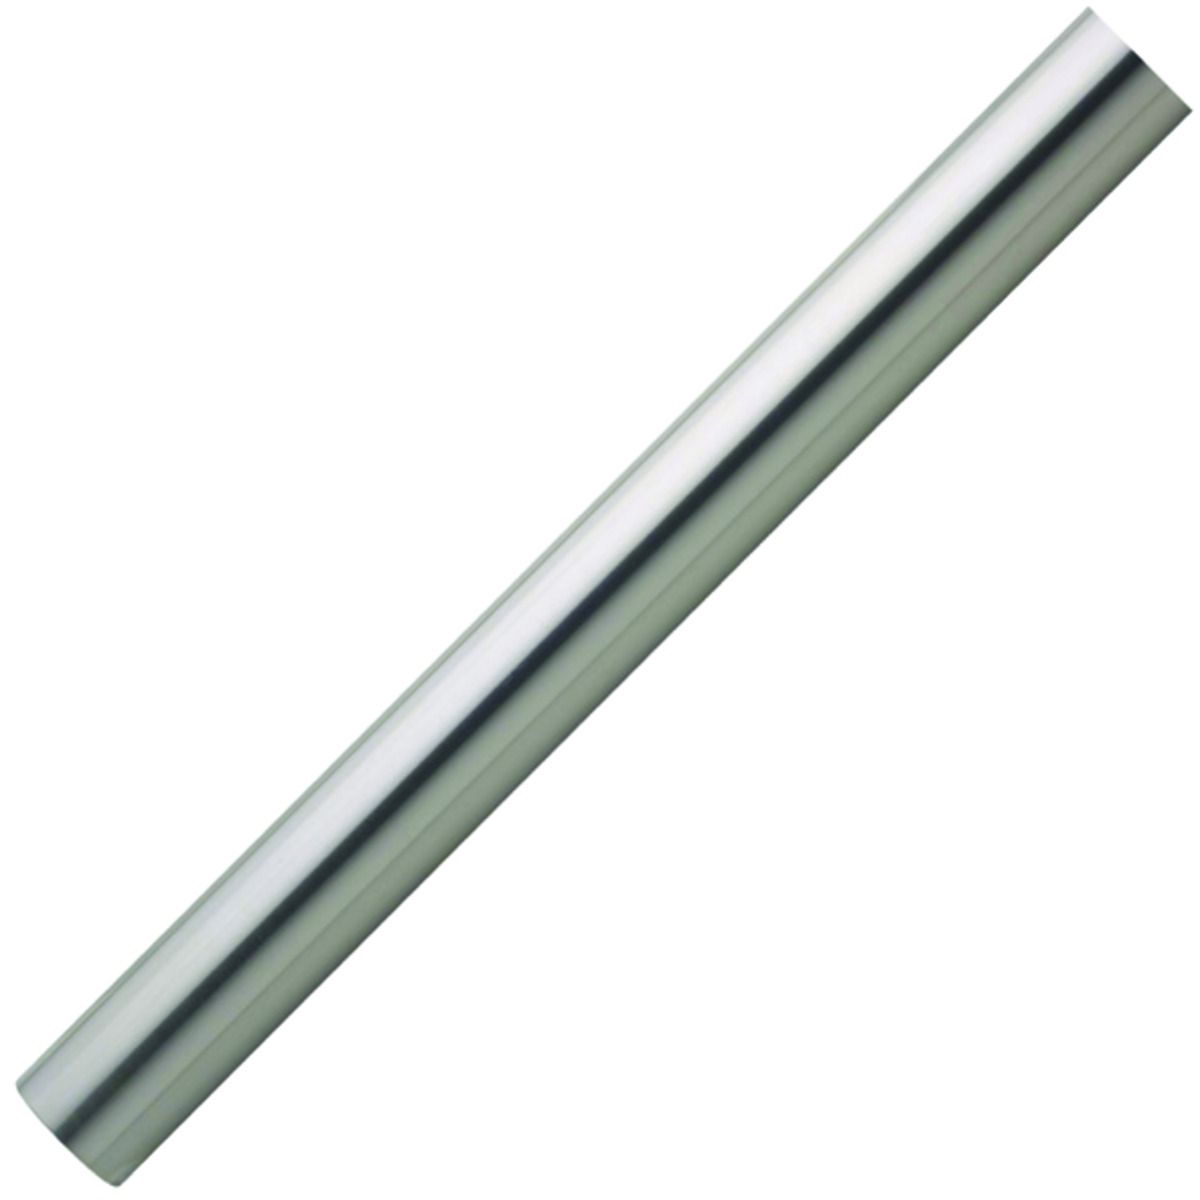 Image of Wickes Brushed Finish Handrail - 40mm x 1.8m